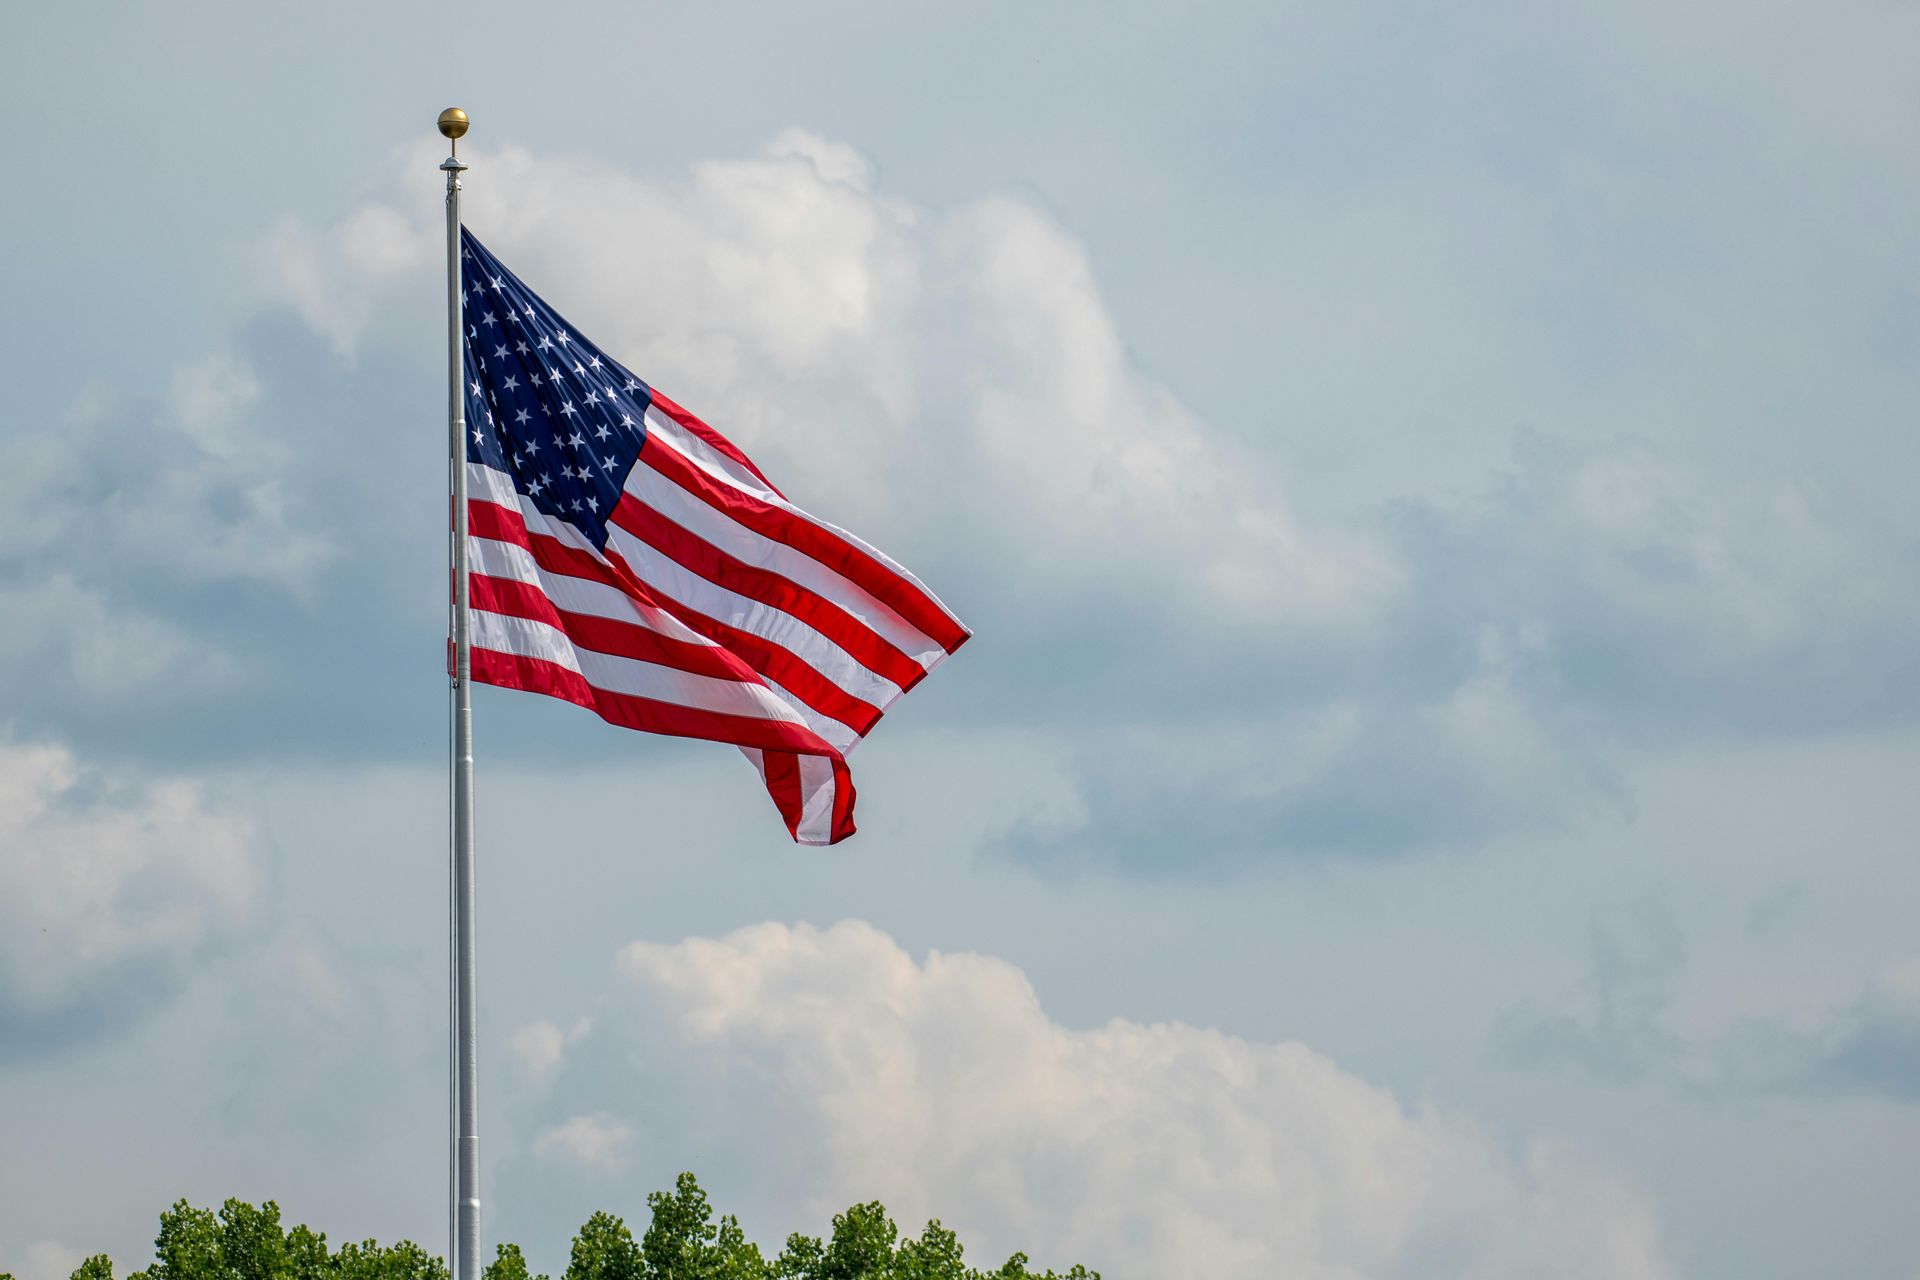 The american flag is waving in the wind on a cloudy day.